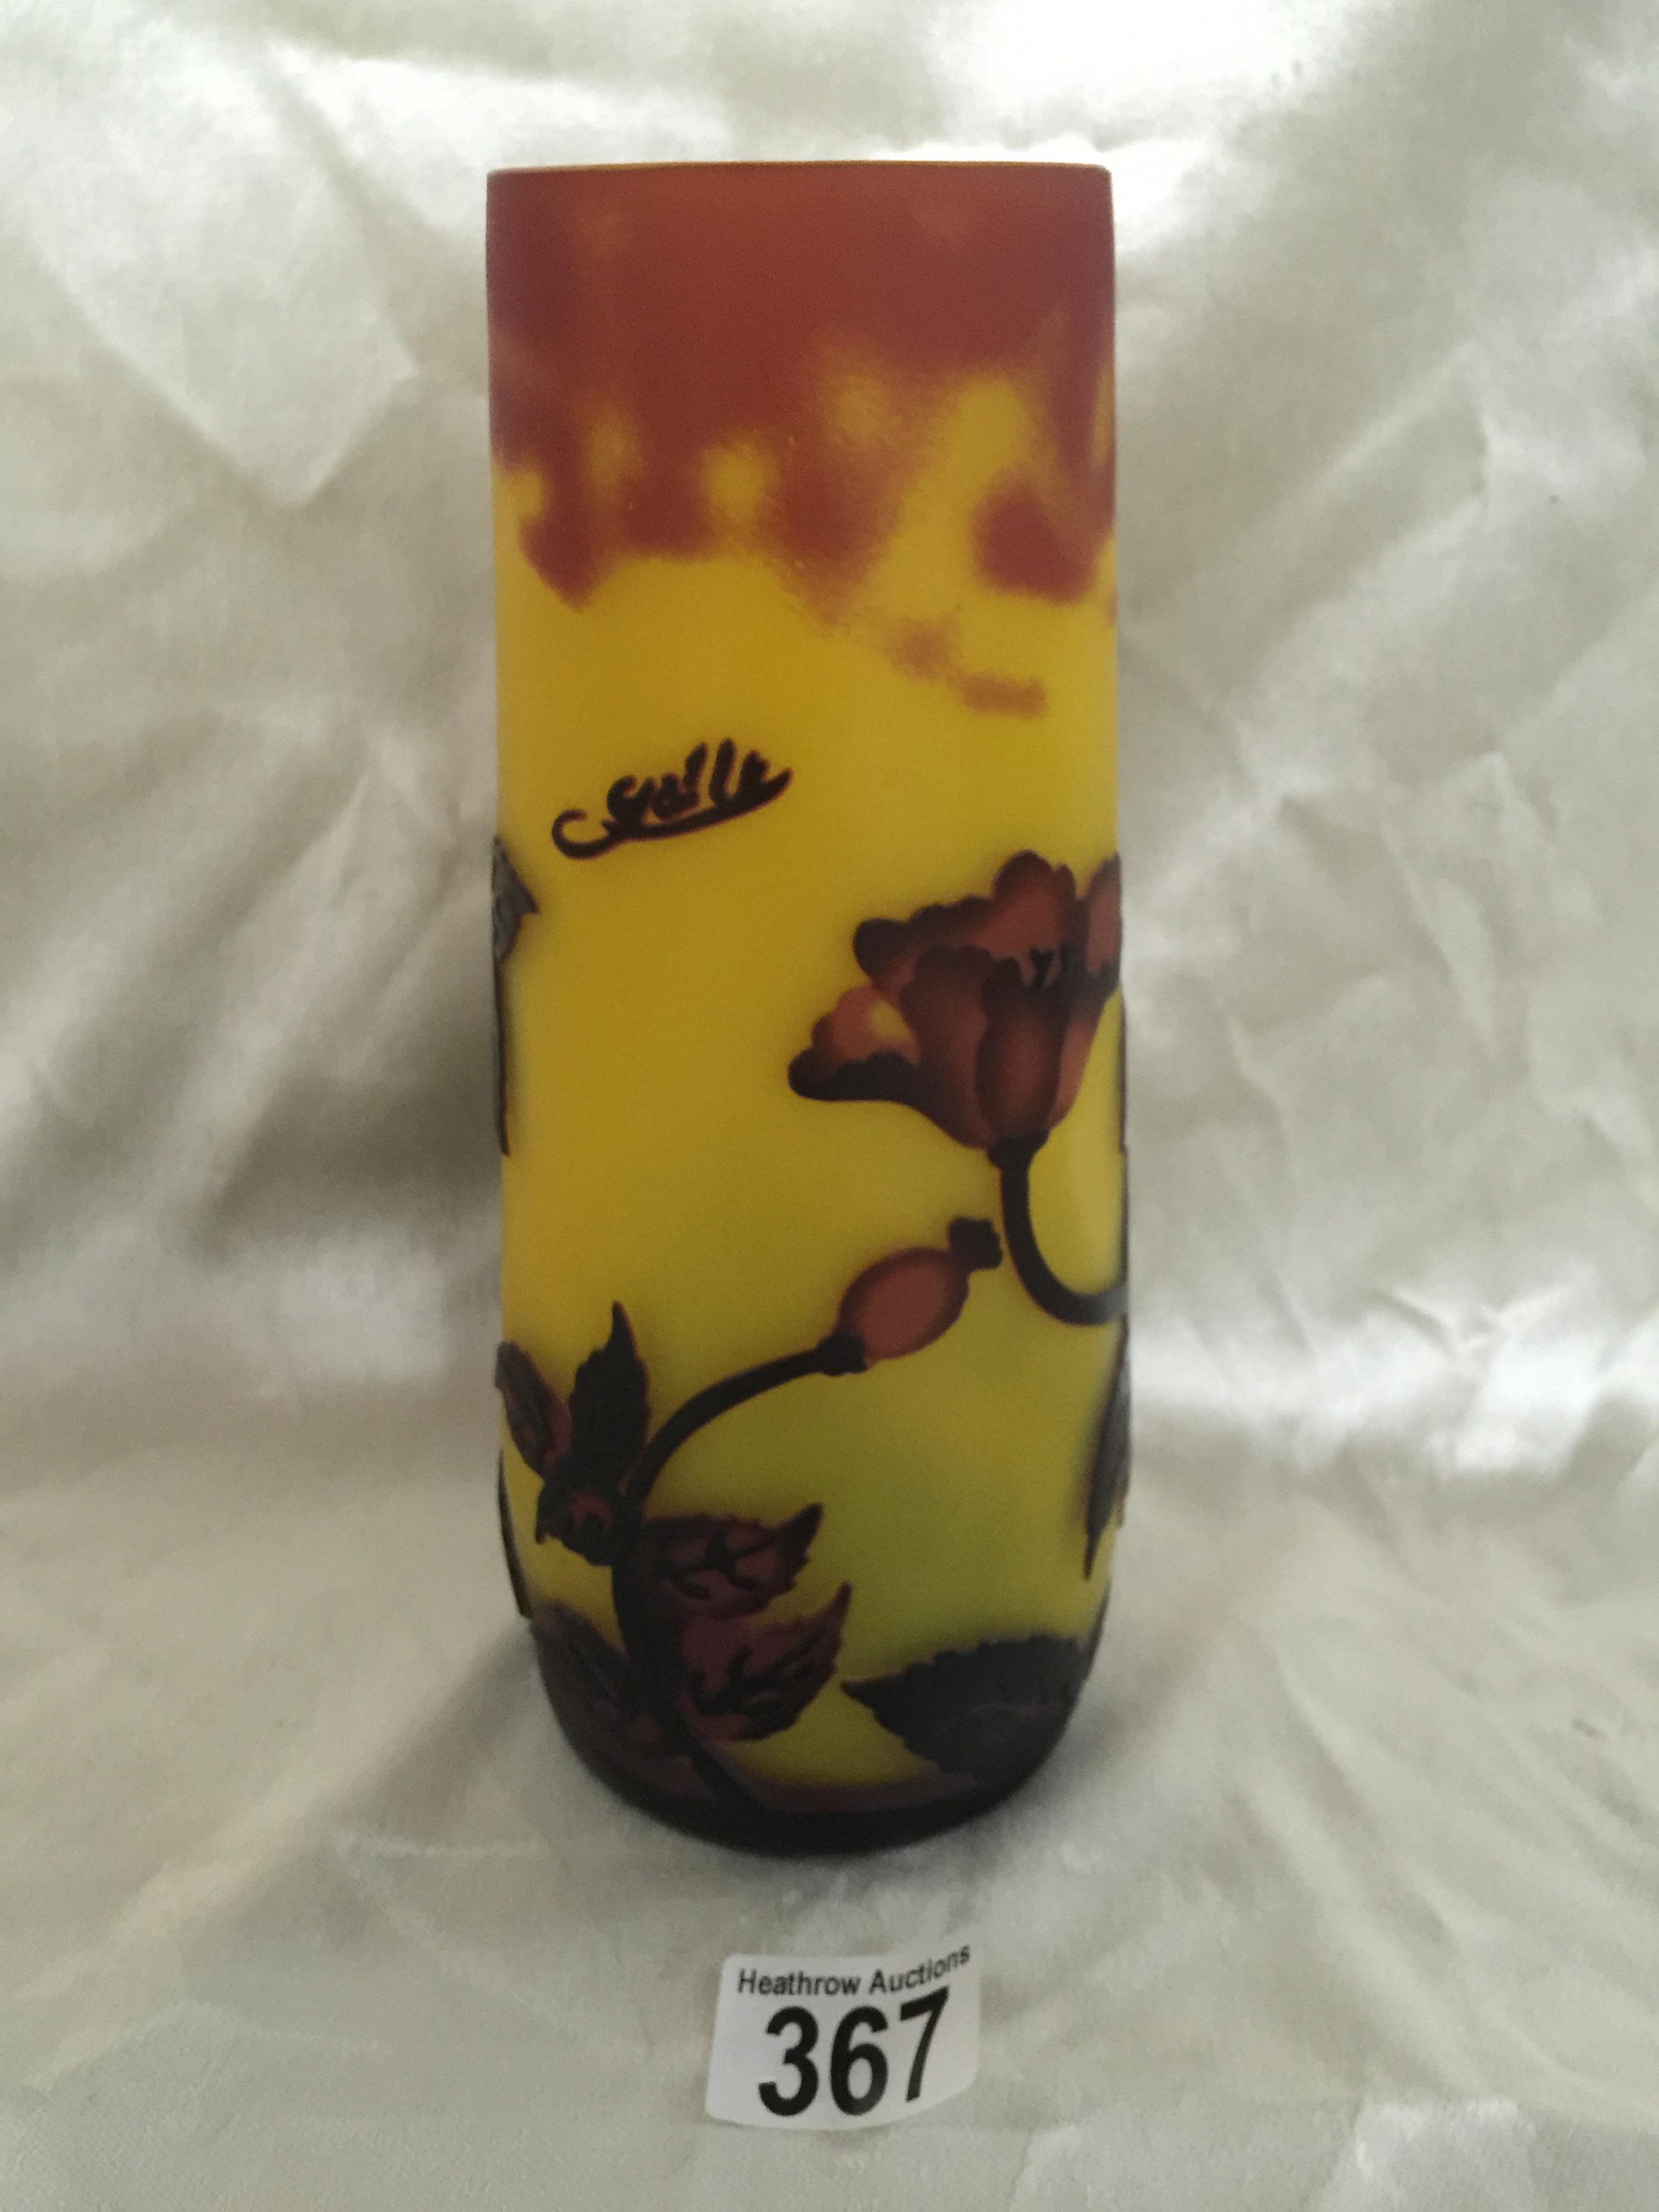 ACID ETCHED FLORAL ROSE PATTERN RED AND YELLOW VASE SIGNED 'GALLET'